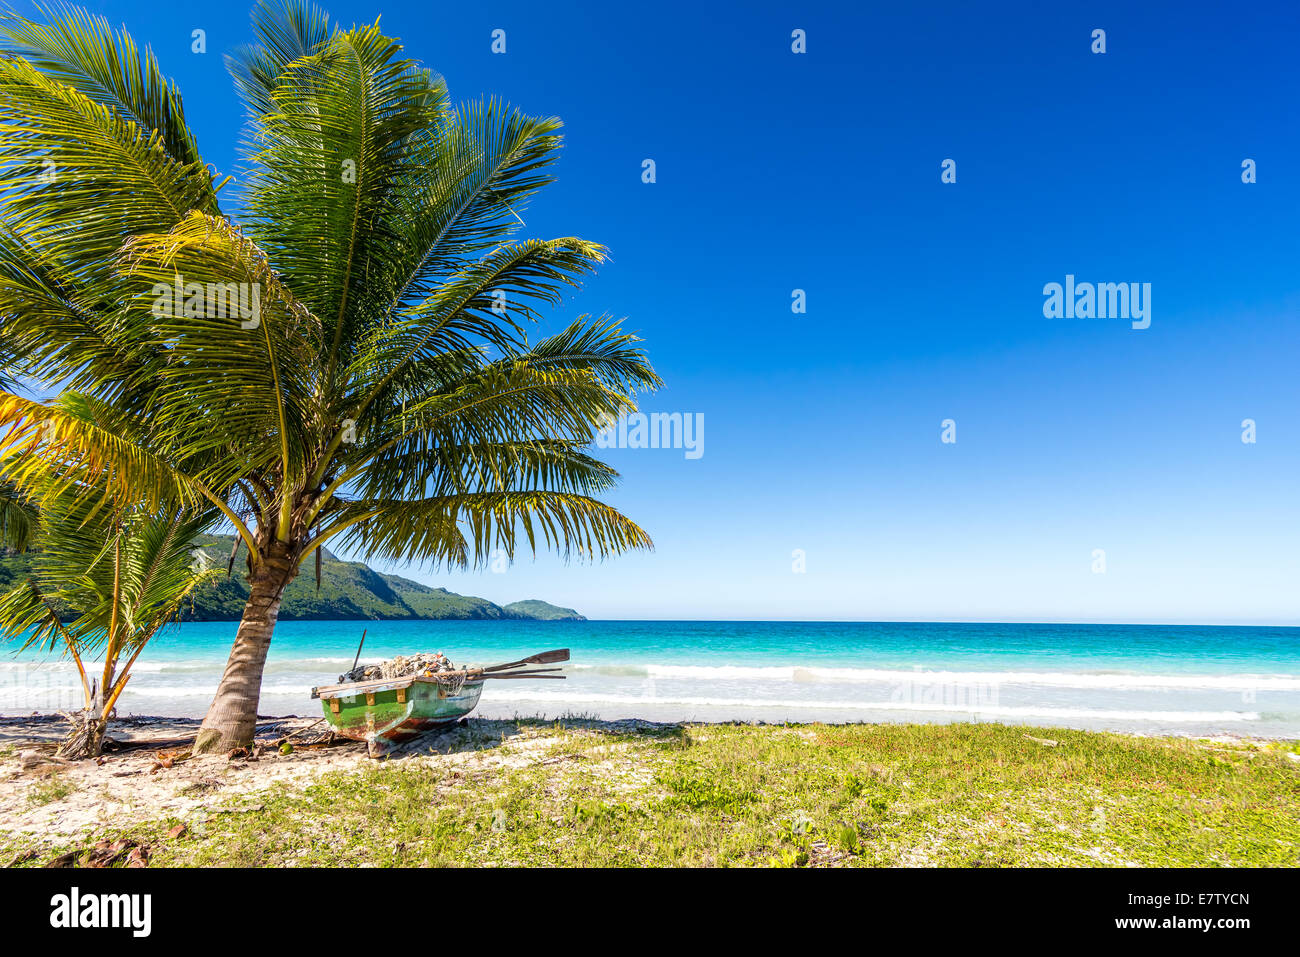 Boat by palm tree on one of the most beautiful tropical beaches in Caribbean, Playa Rincon, near Las Galeras, Dominican Republic Stock Photo